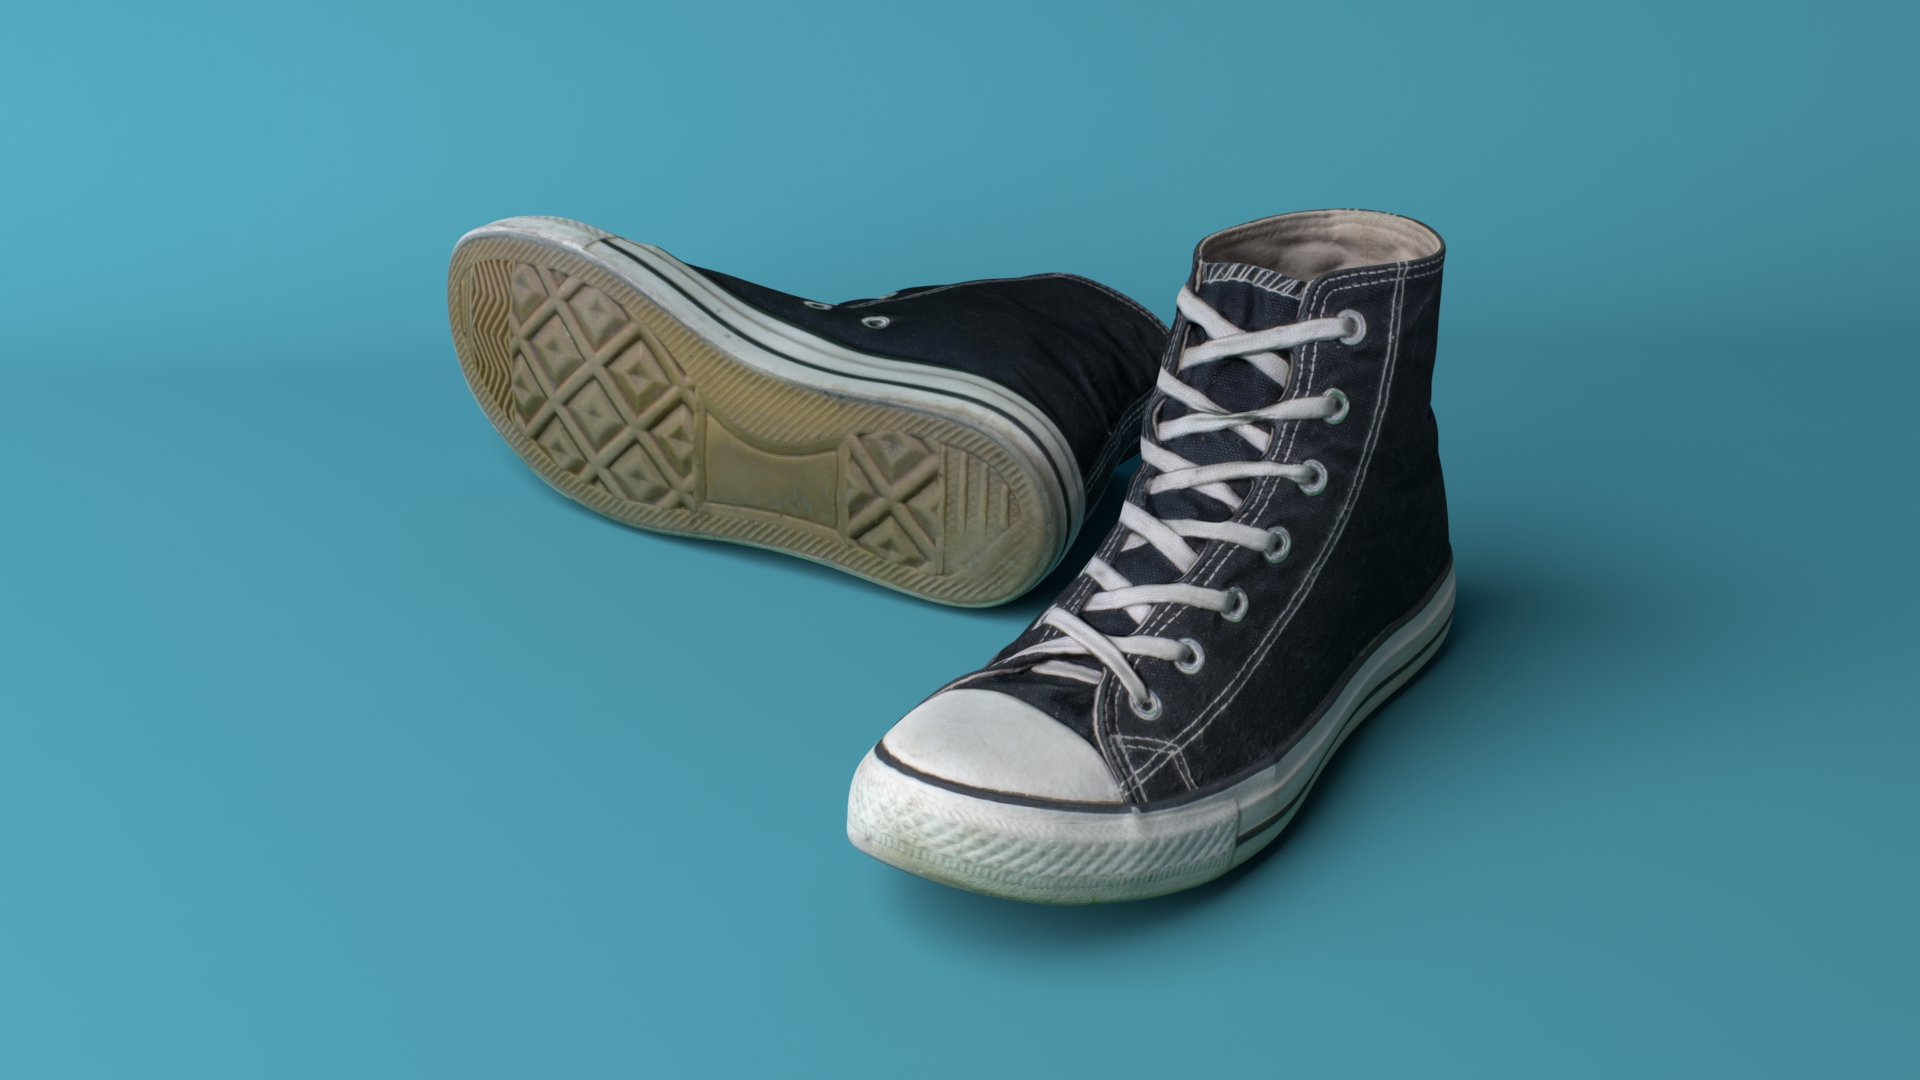 Converse Shoes by | 3DOcean